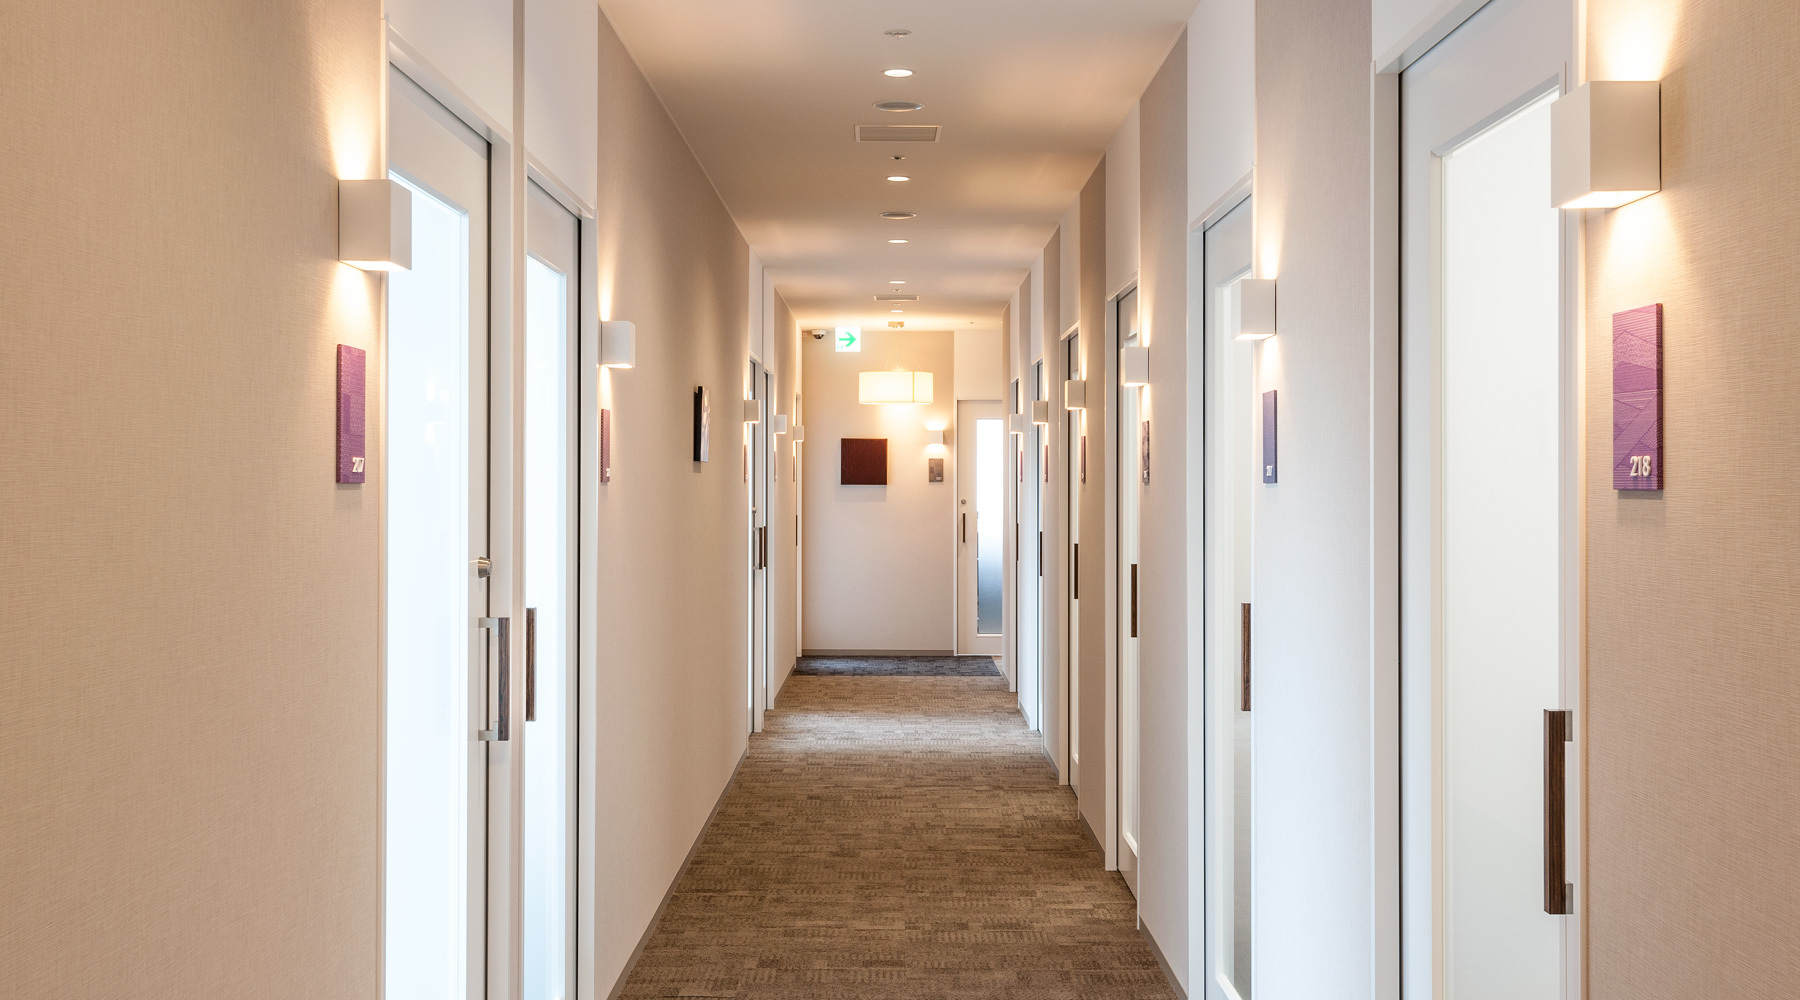 The corridor is a relaxing space that is a complete change from the tense atmosphere of the office.